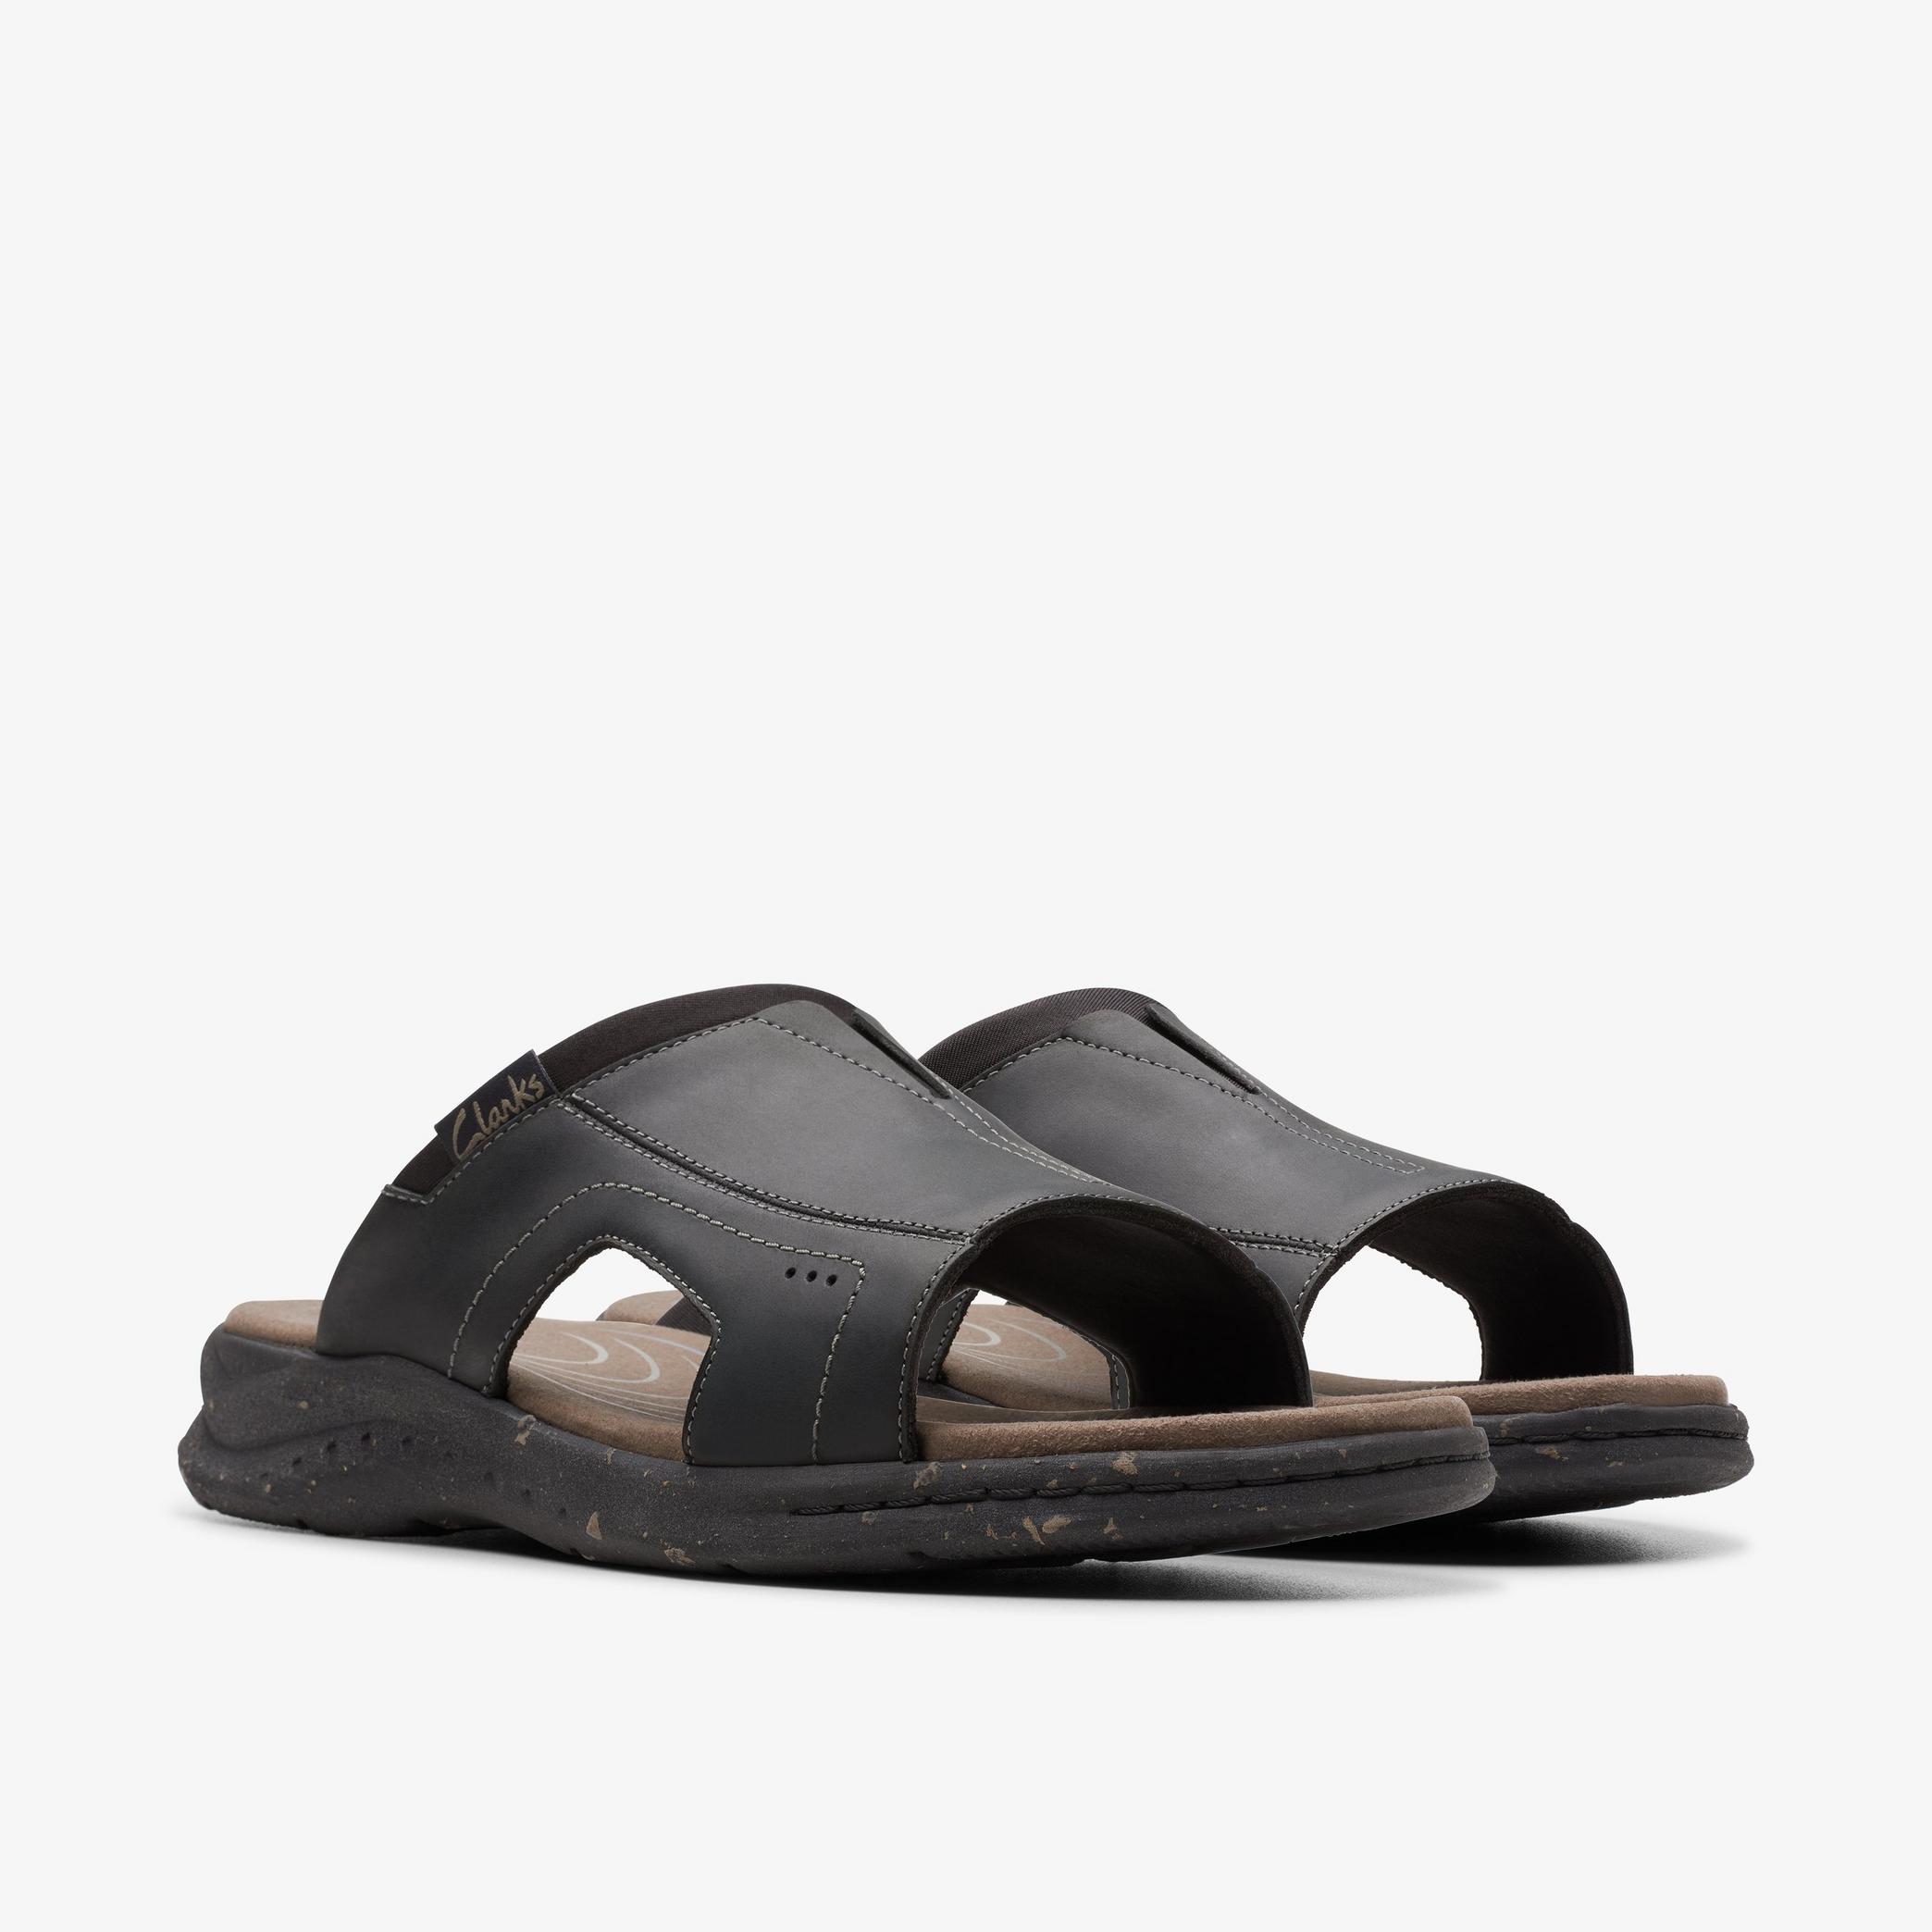 Walkford Band Black Leather Flat Sandals, view 4 of 6